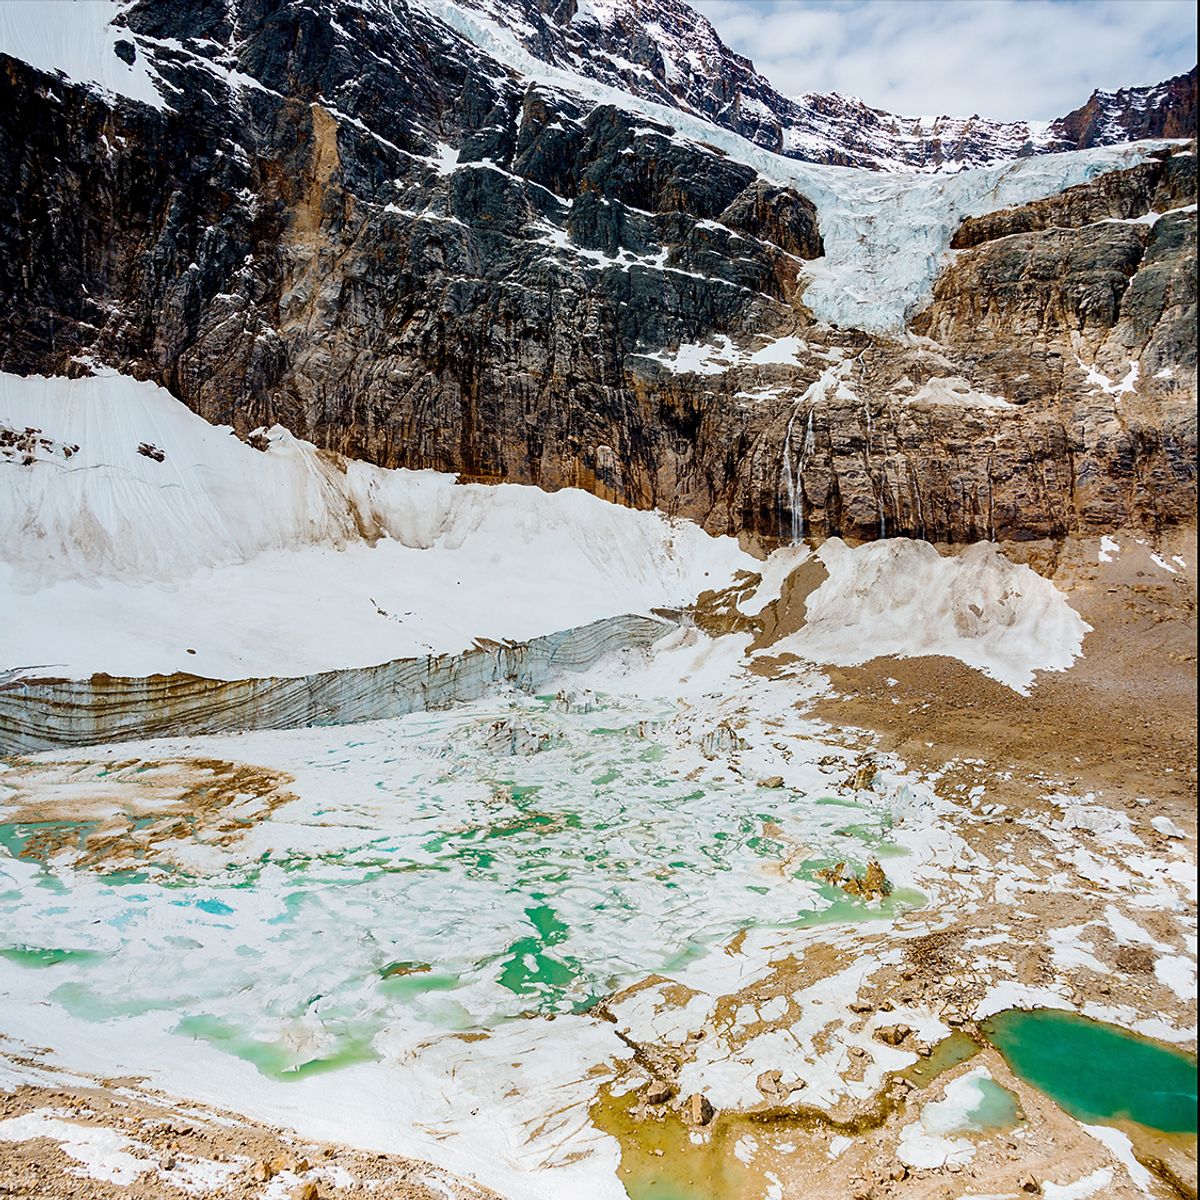 Eric Hatch, Remains of Angel Glacier, Mt. Edith Cavell, Alberta (2016). Courtesy of the artist. The Mohawk Gallery at Robin Imaging.